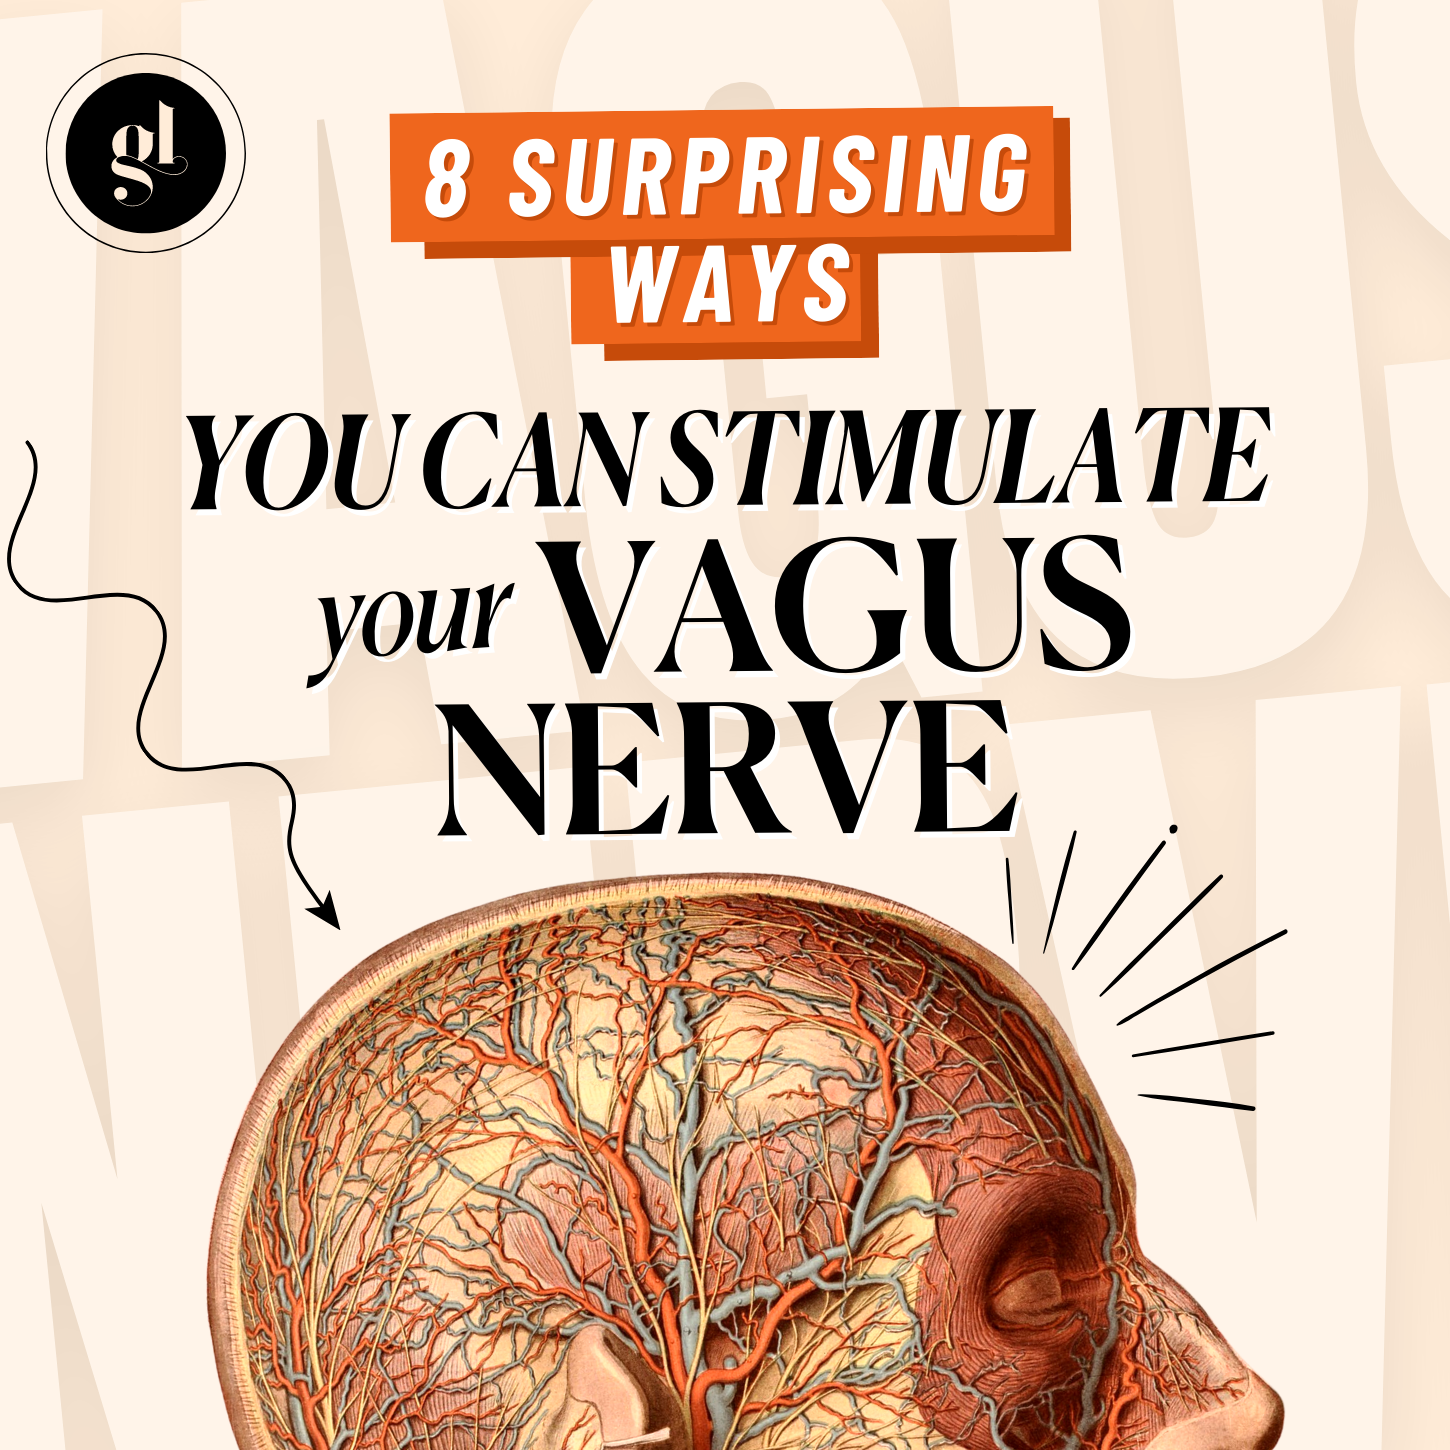 8 Surprising Ways You Can Stimulate Your Vagus Nerve